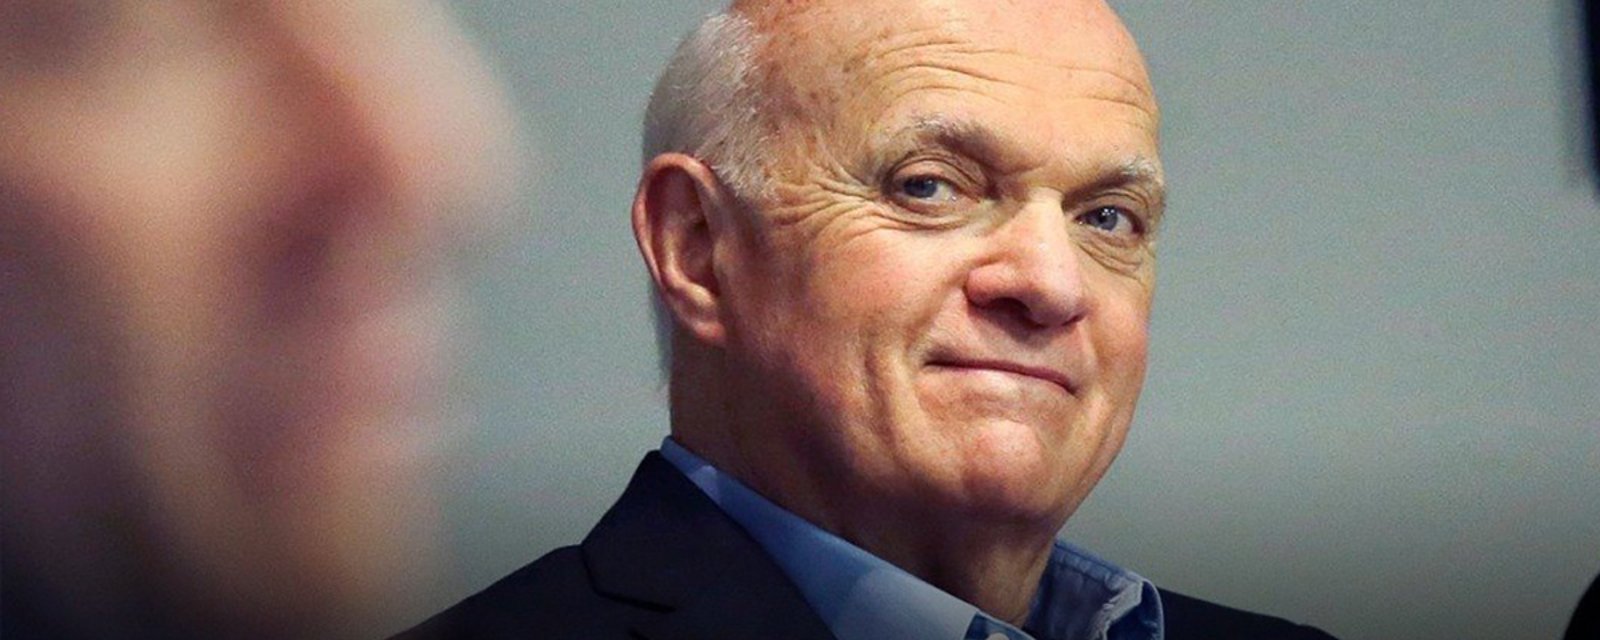 Report: Leafs’ GM Lamoriello tempers expectations for 2017-18